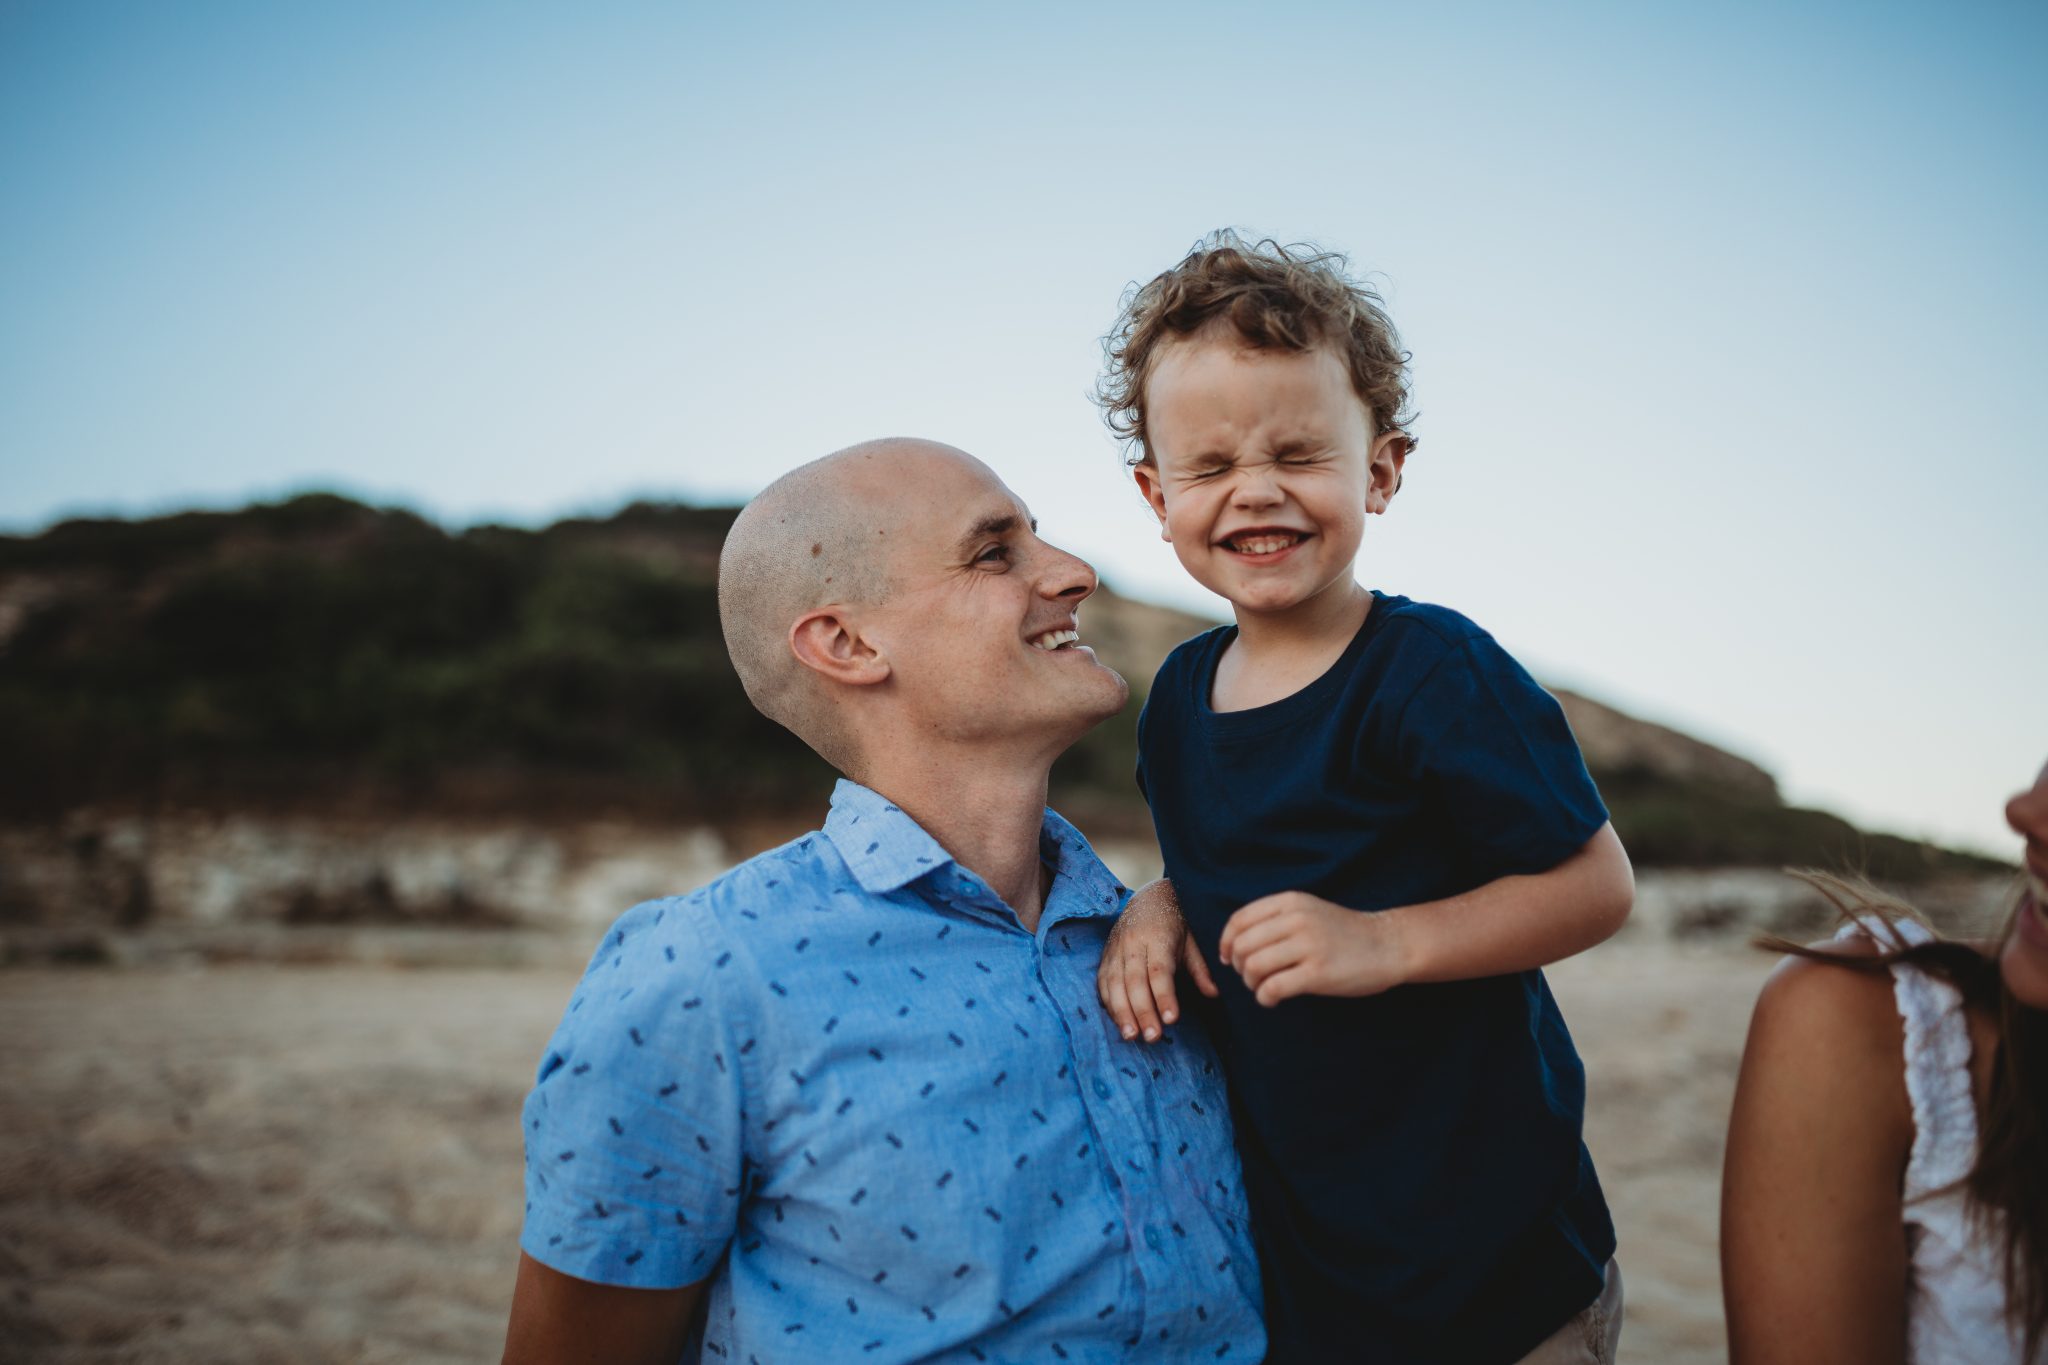 Newcastle family photographer; father and son smiling